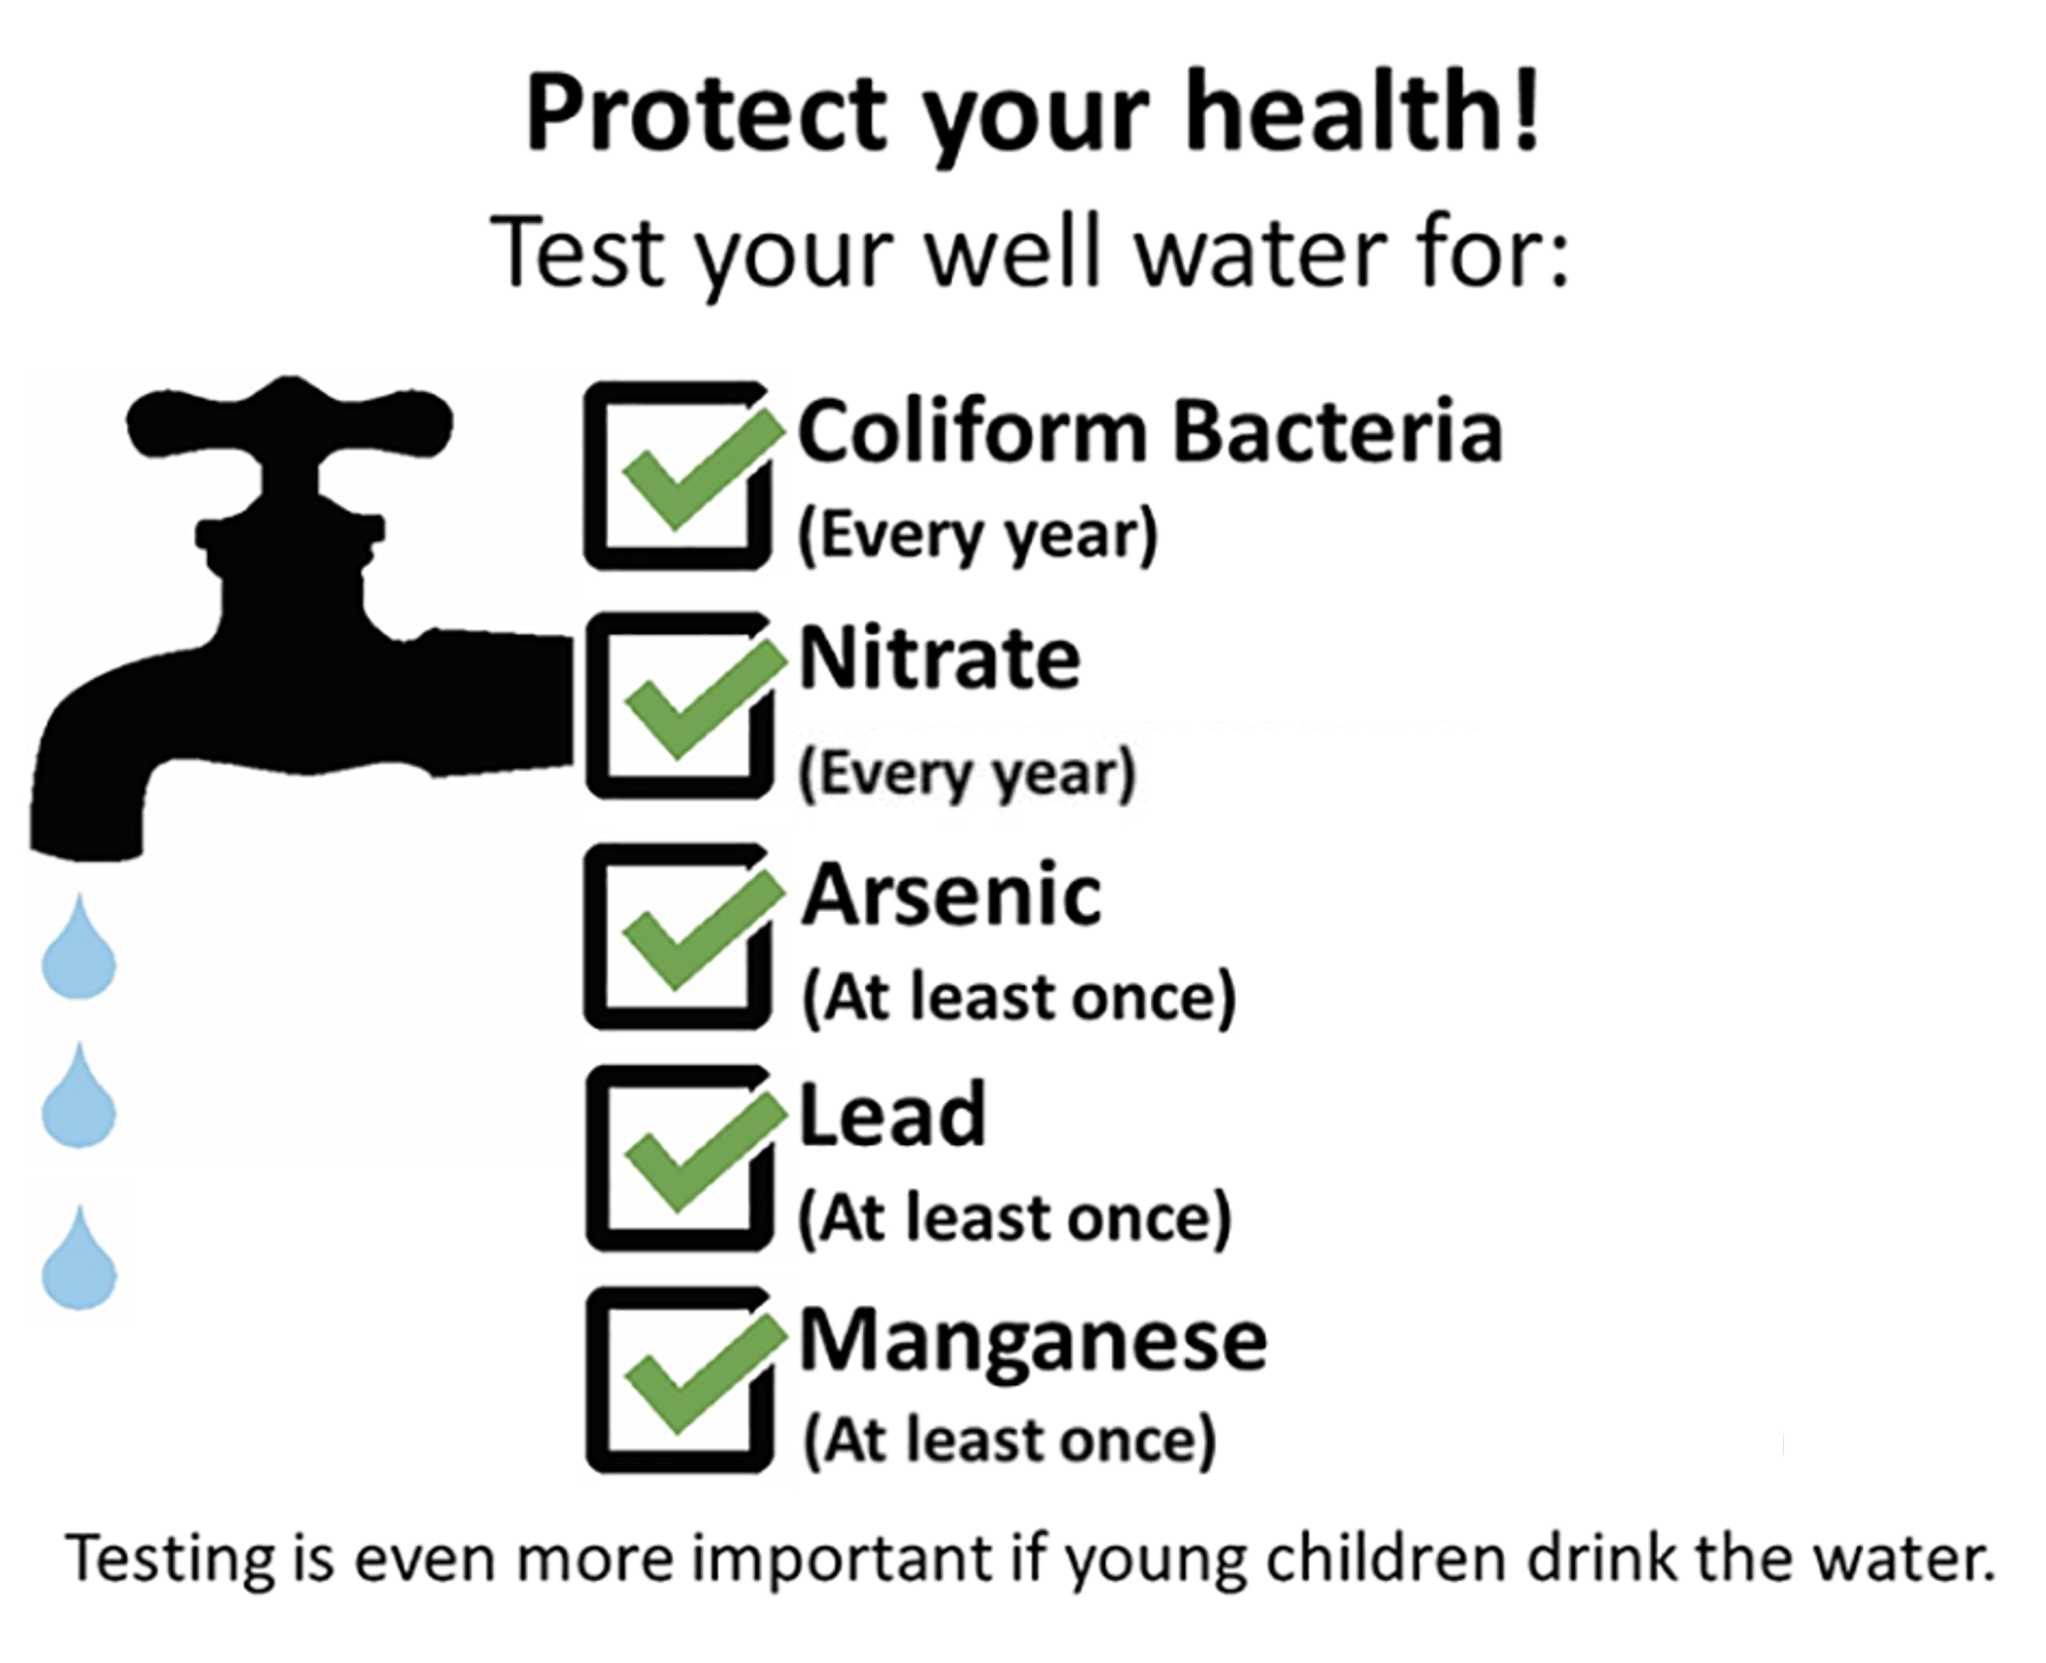 Protect your health! Test your well water for: Coliform Bacteria (every year), Nitrate (every other year), Arsenic (at least once), Lead (at least once), Manganese (before a baby drinks the water). Testing is even more important if young children drink the water.